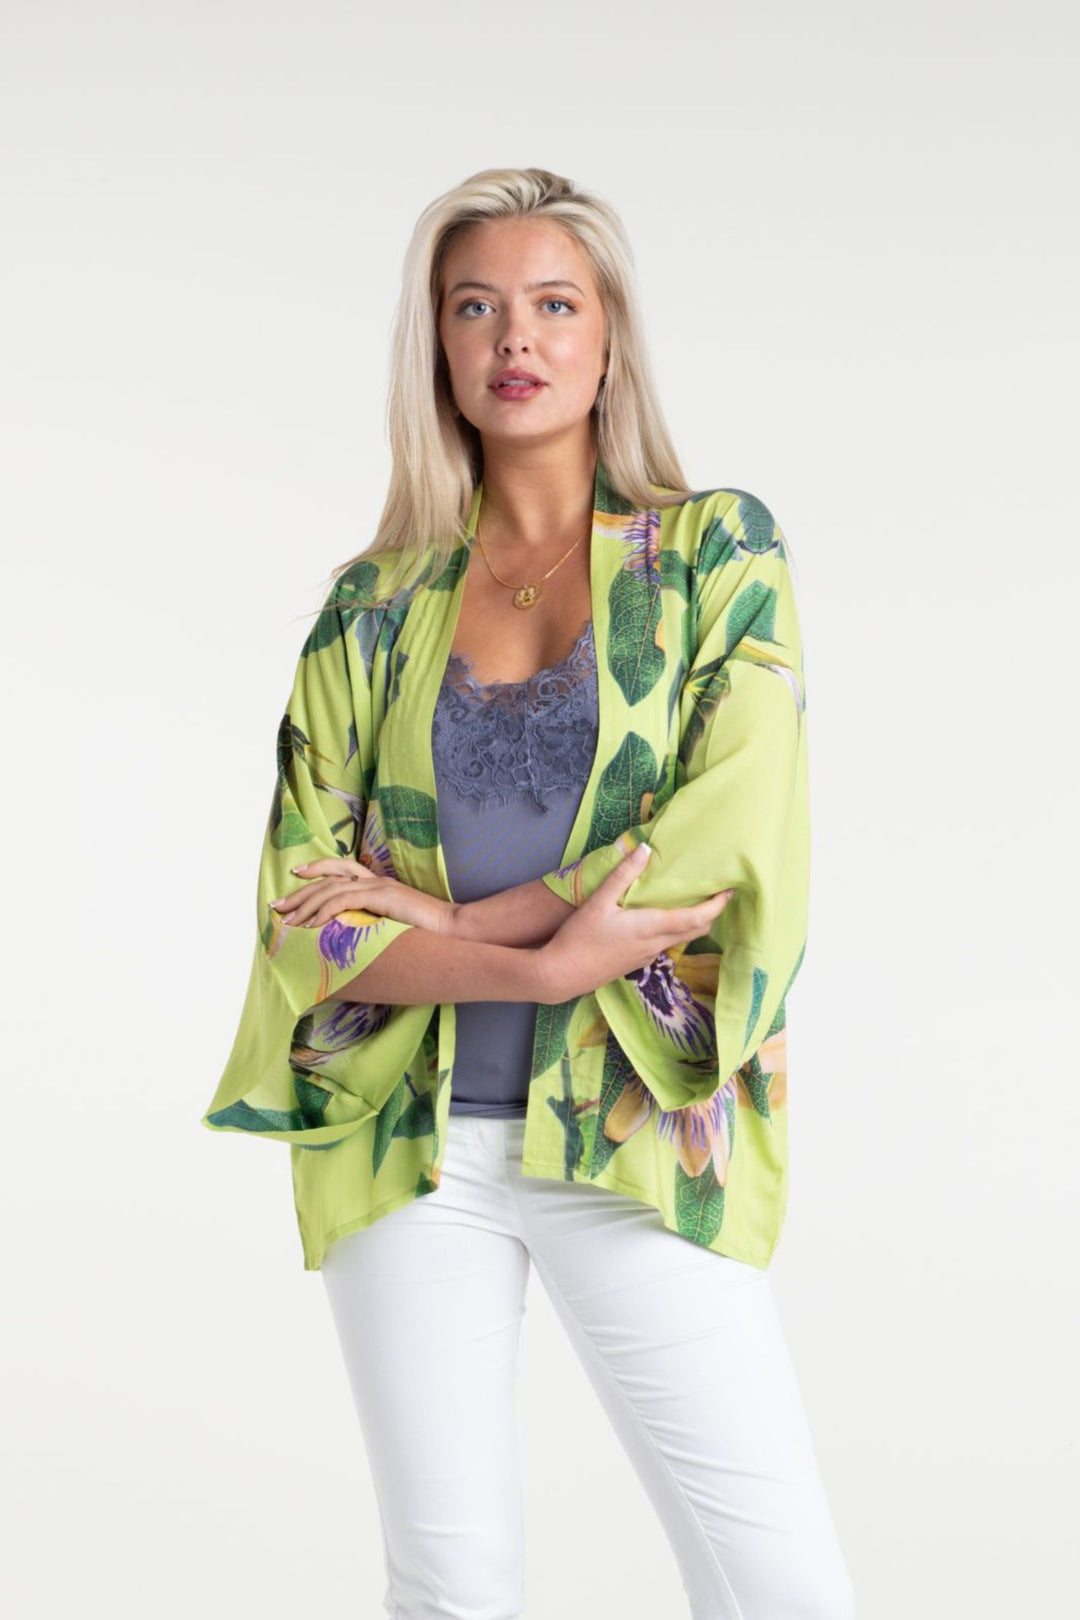 From My Mother's Garden Lime Passion Flower Short Kimono